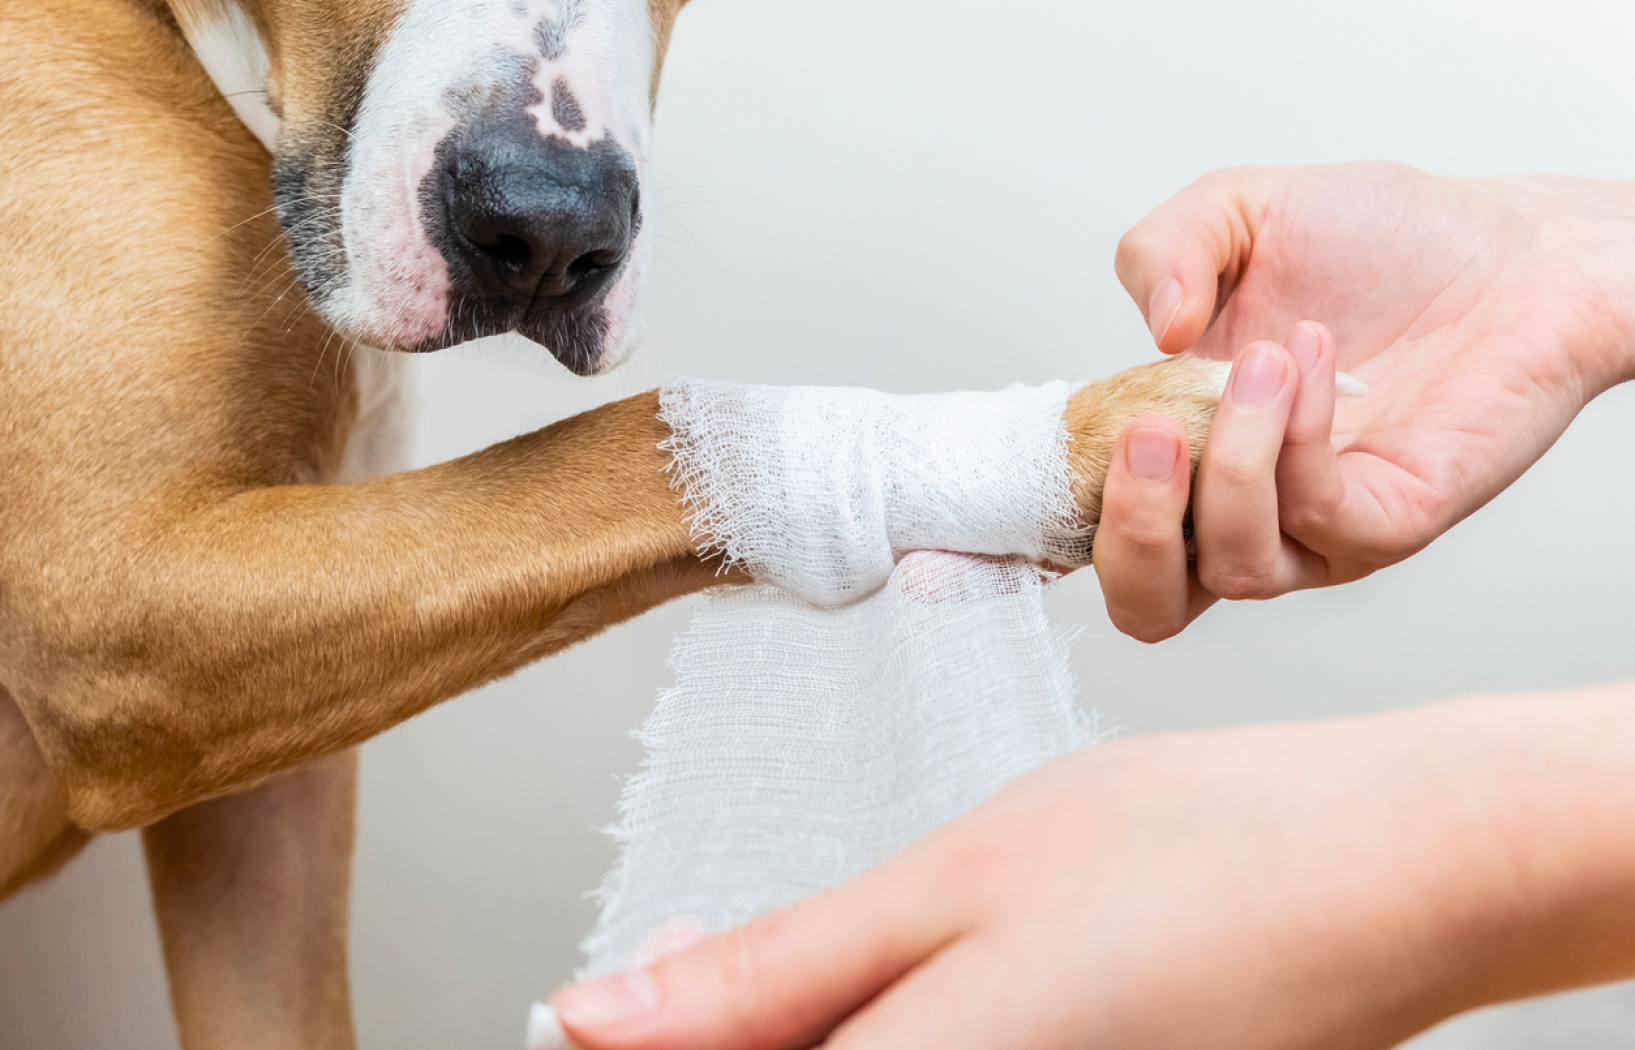 Person Wrapping Gauze on Dog's Paw